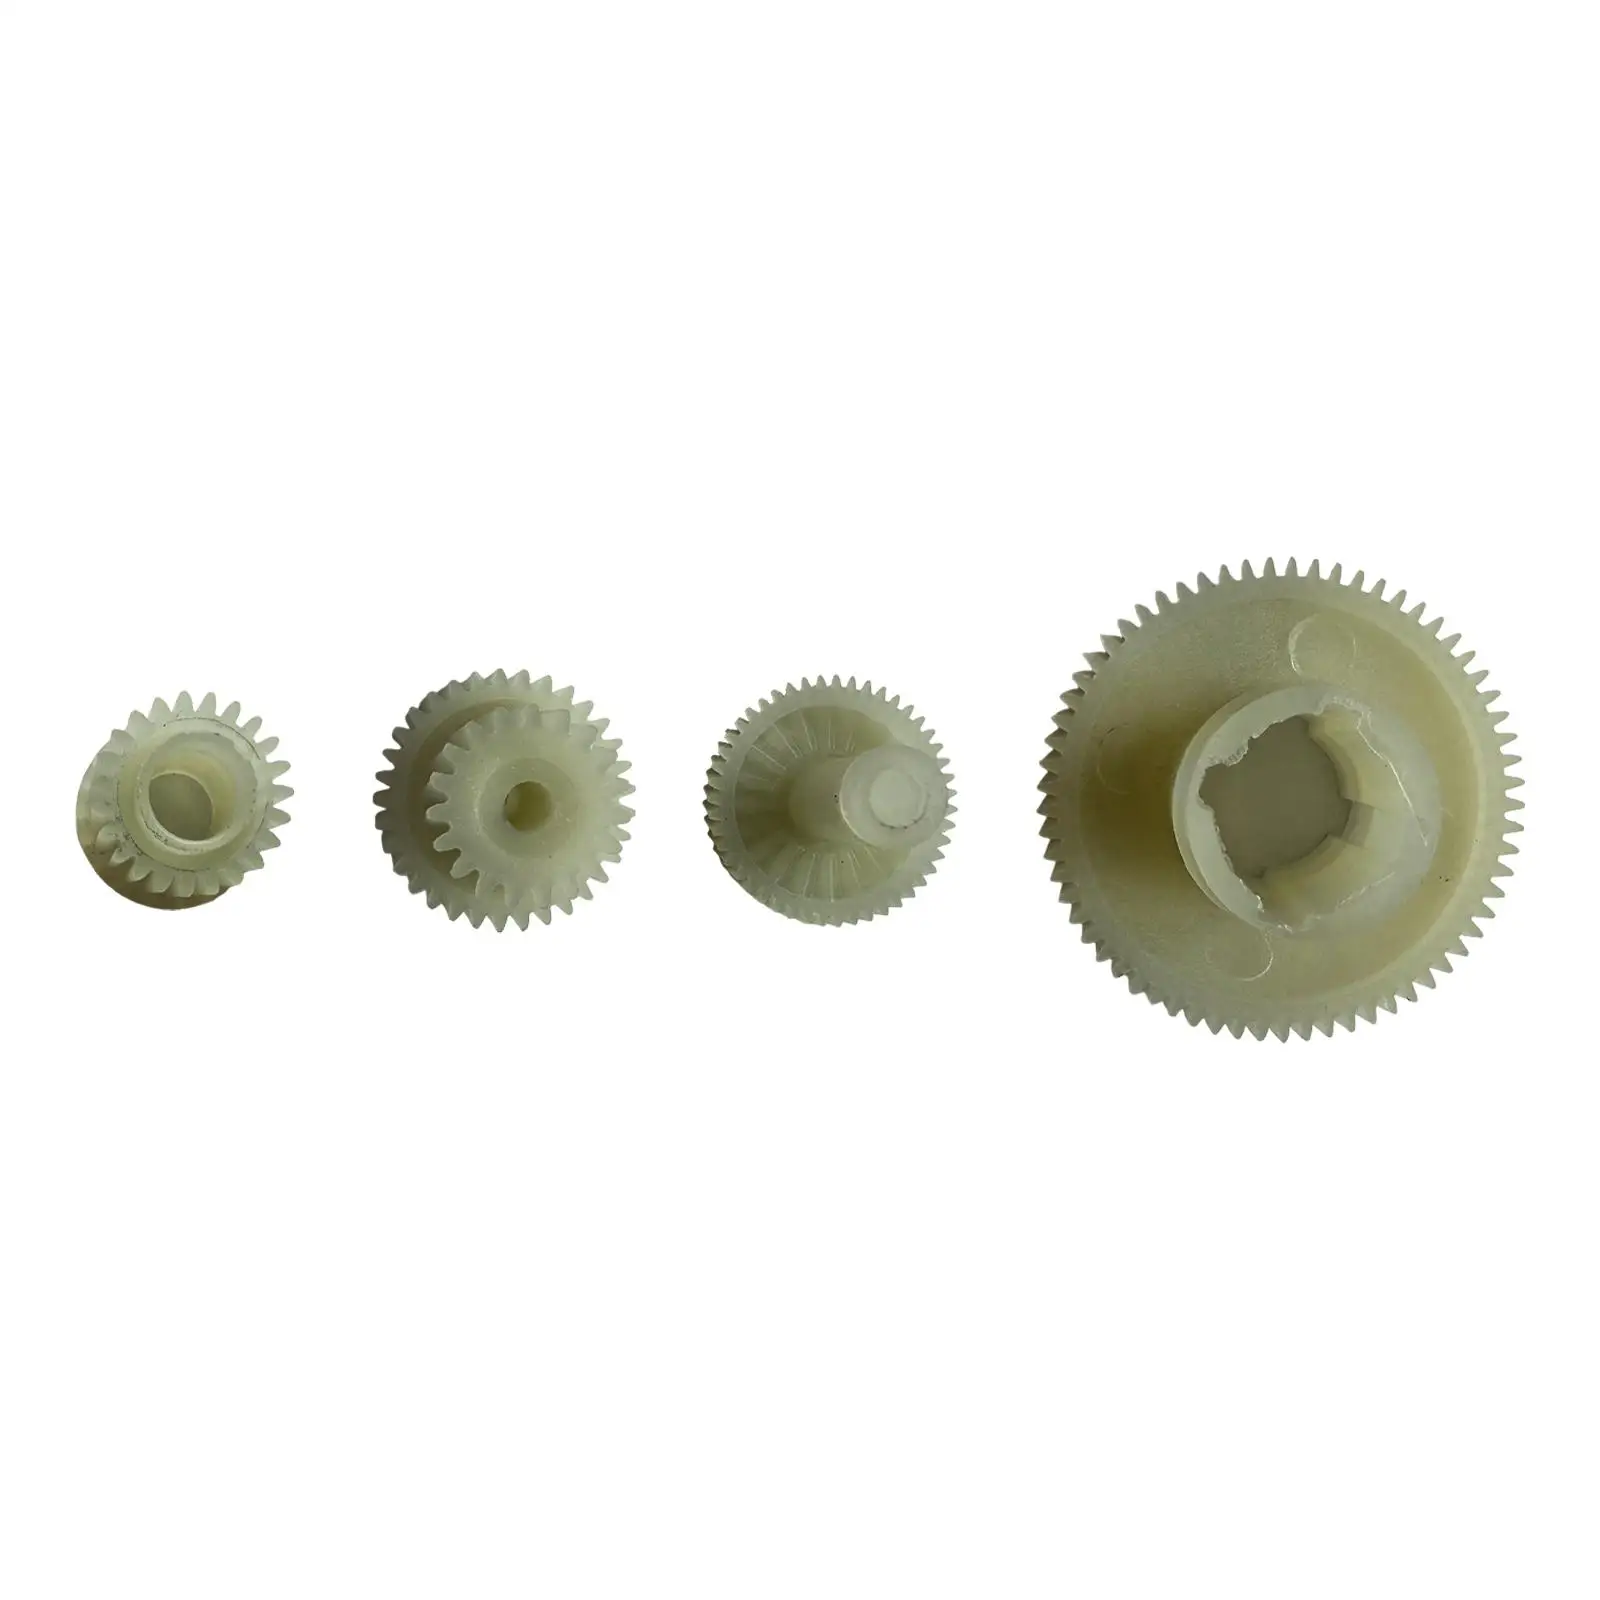 Parking Brake Actuator Repair Gears Durable Directly Replace High Quality for Land Rover Discovery 3 4 Range Rover Sport